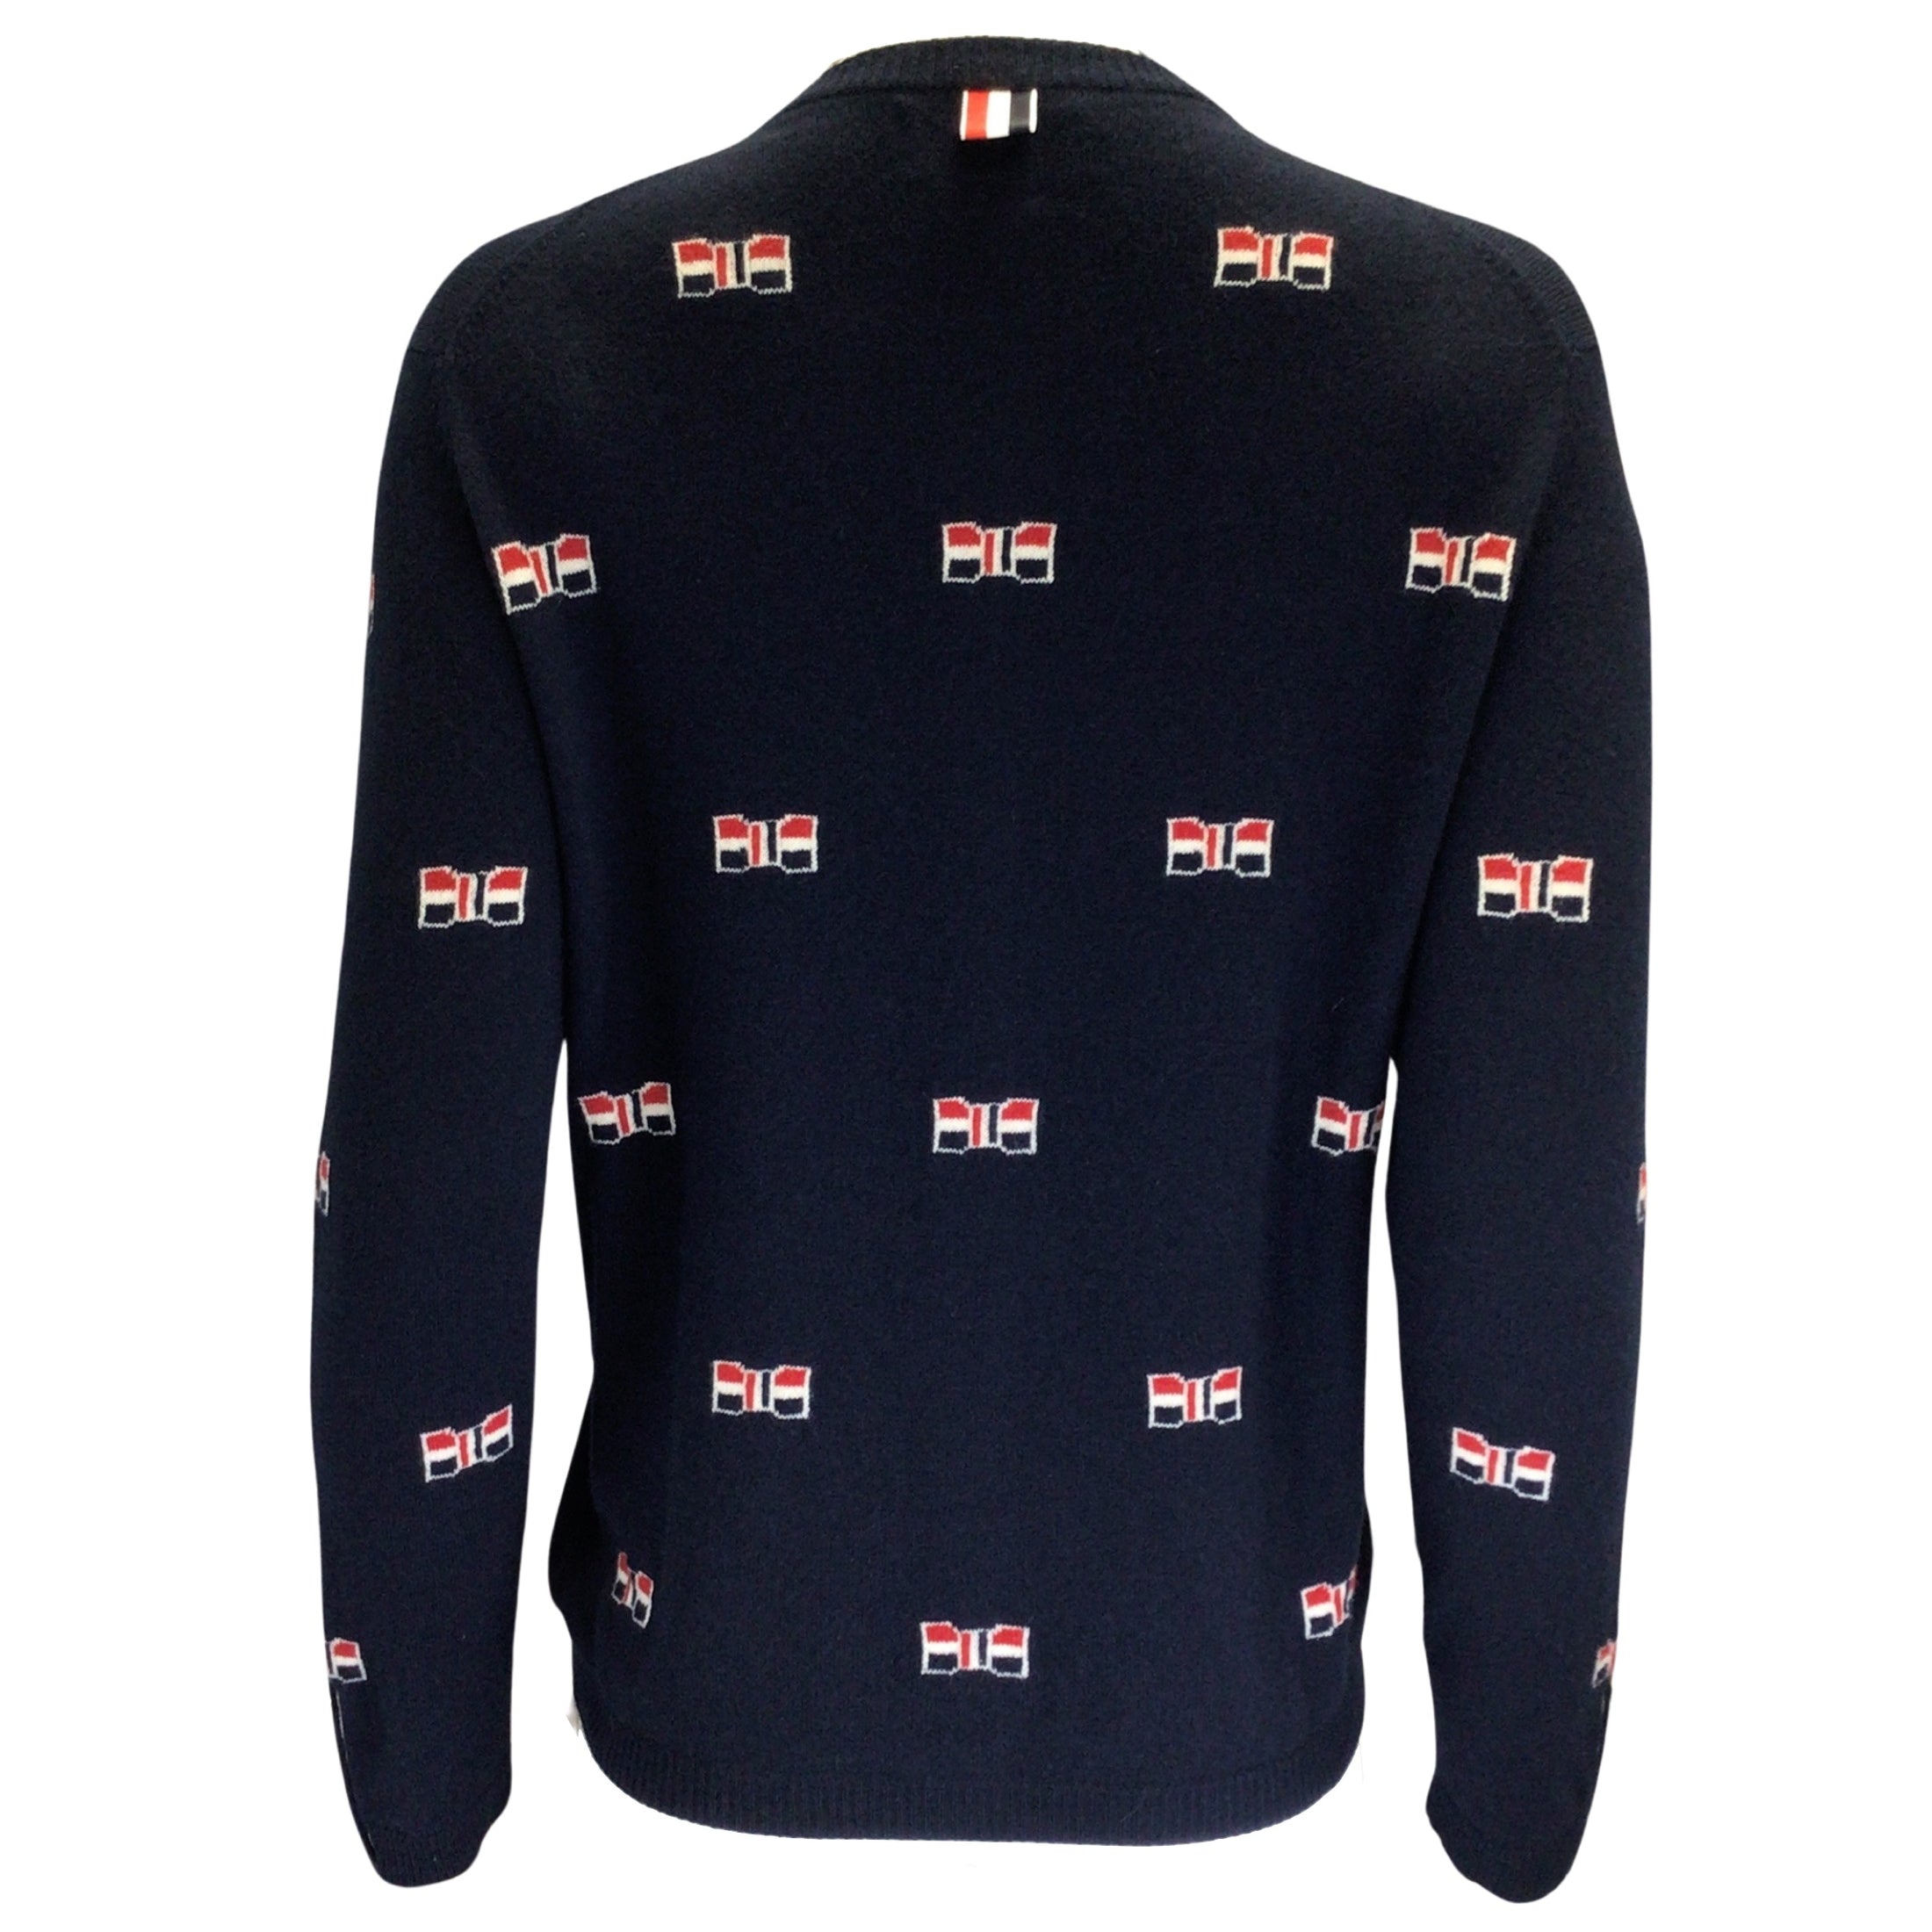 Thom Browne Navy Blue Bow Design Long Sleeved Button-down Cashmere Knit Cardigan Sweater